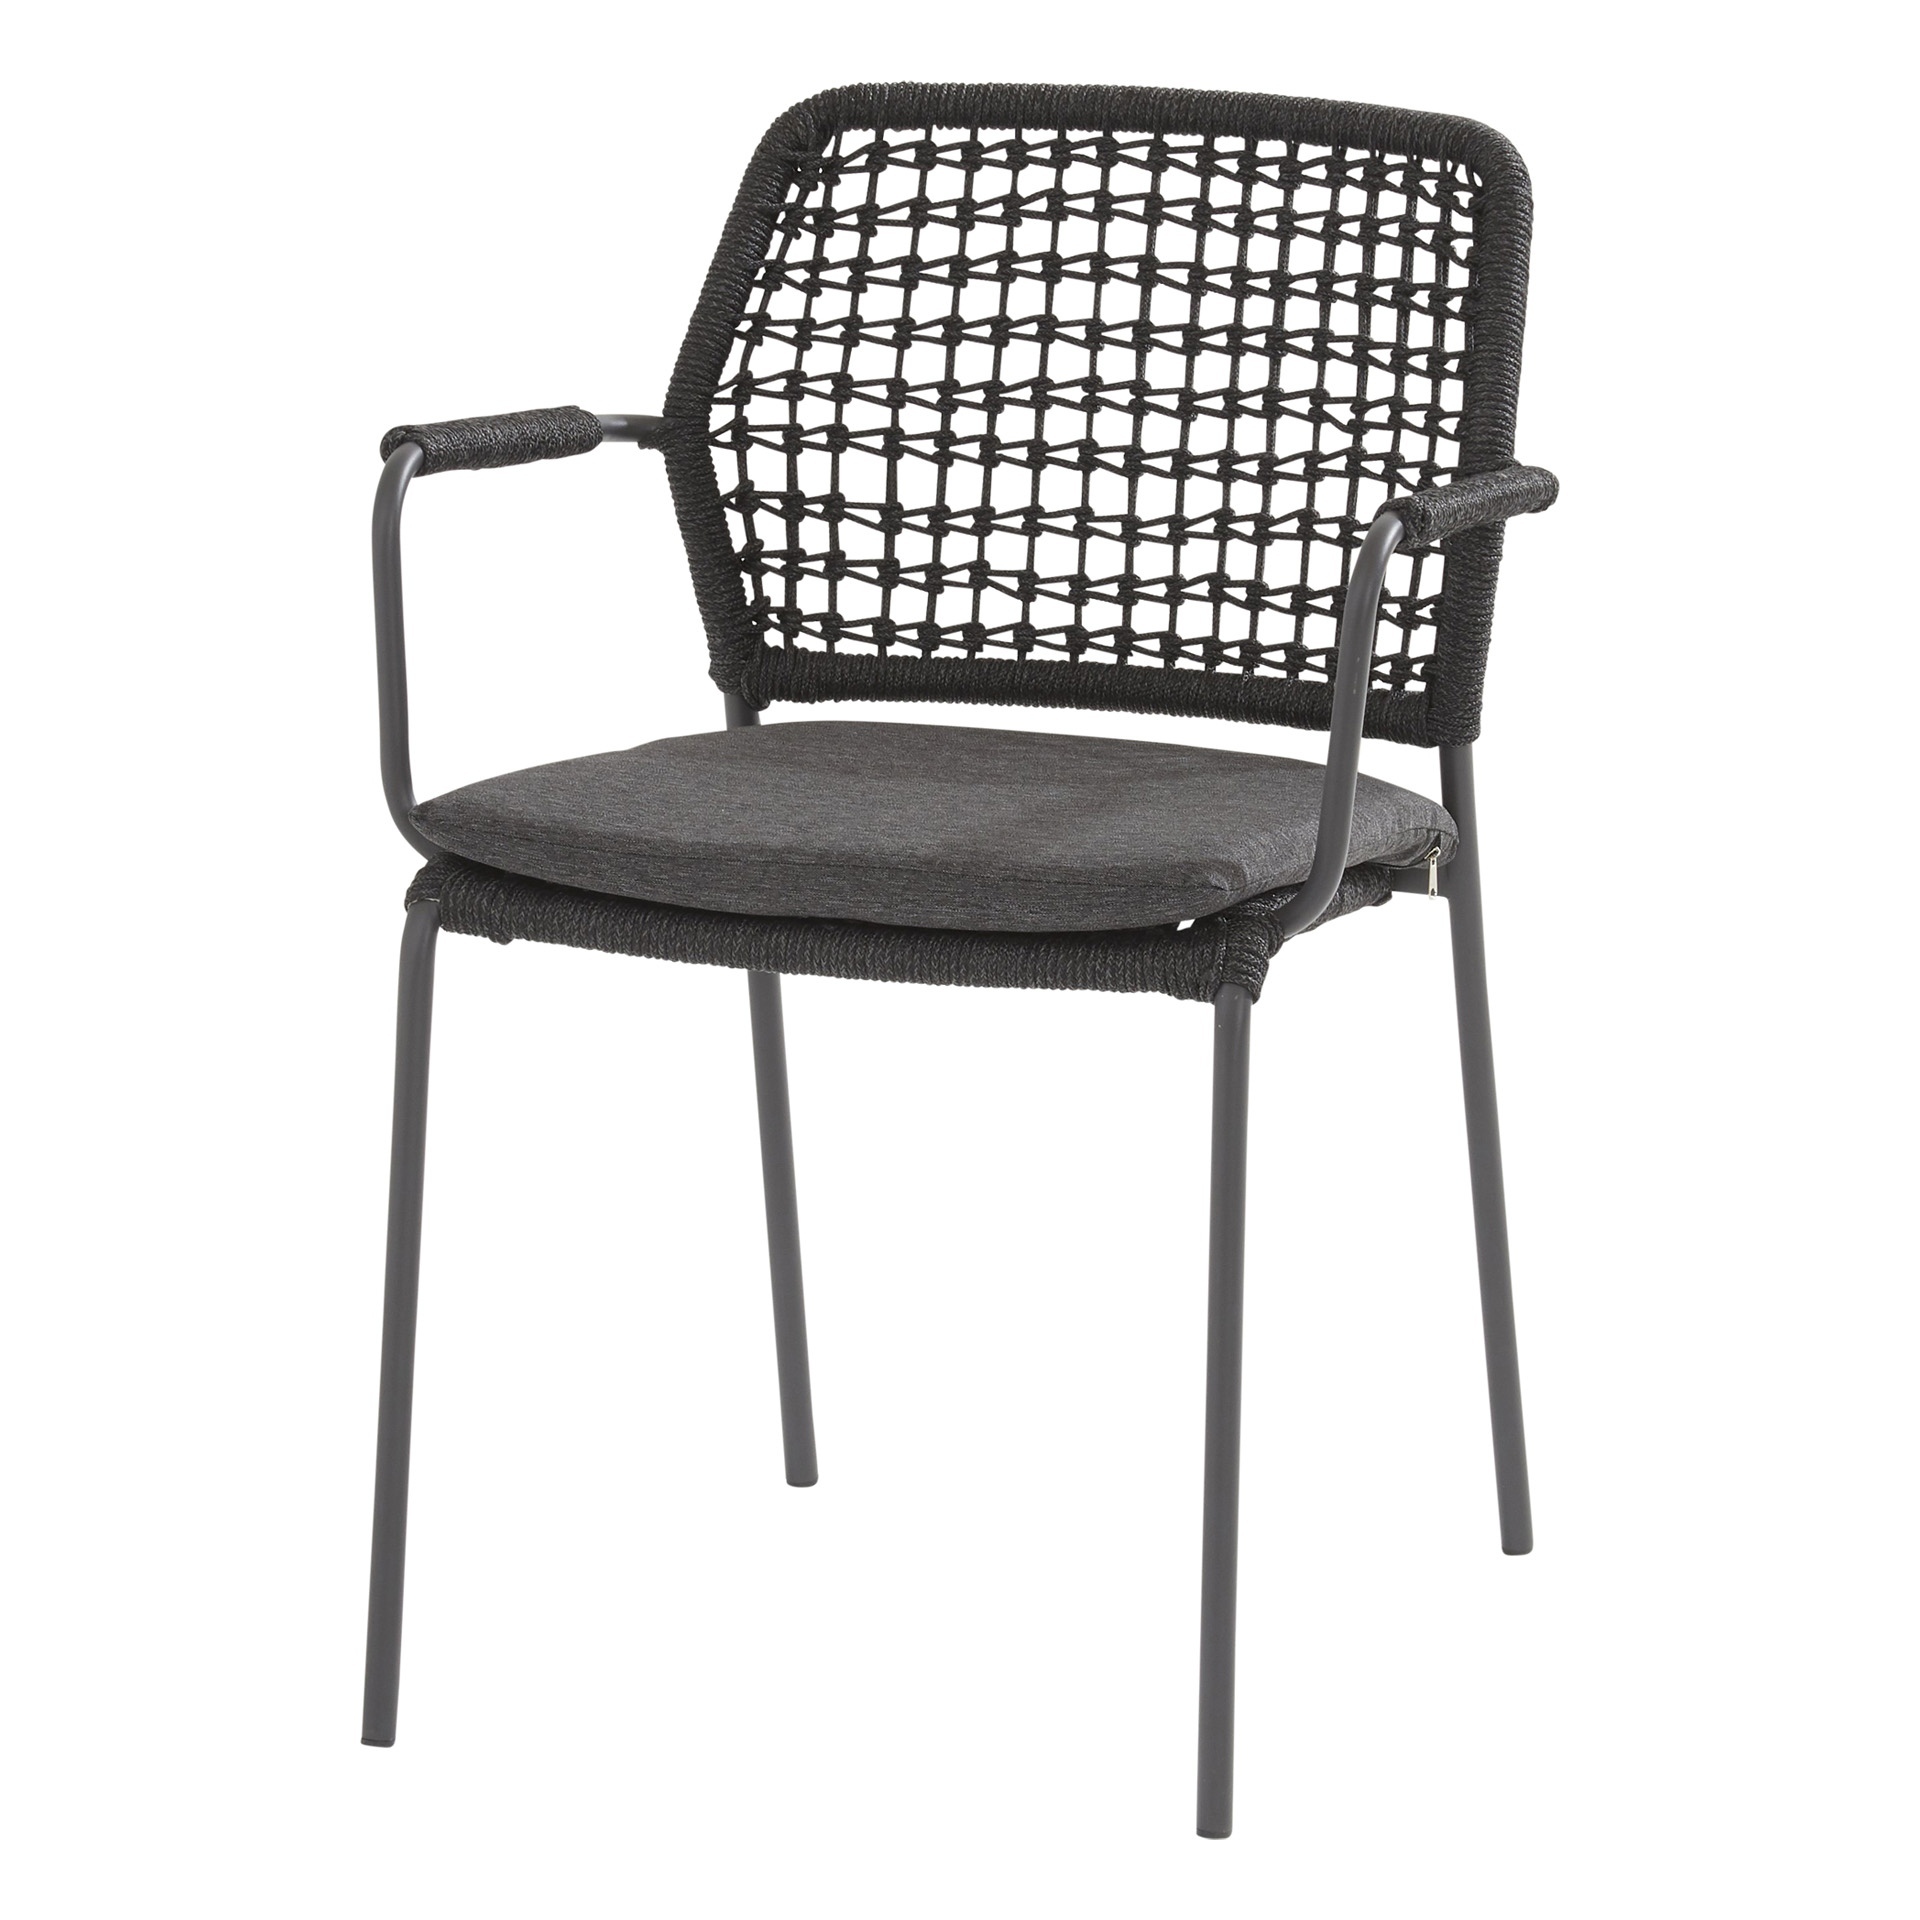 Barista stacking chair Antracite with cushion